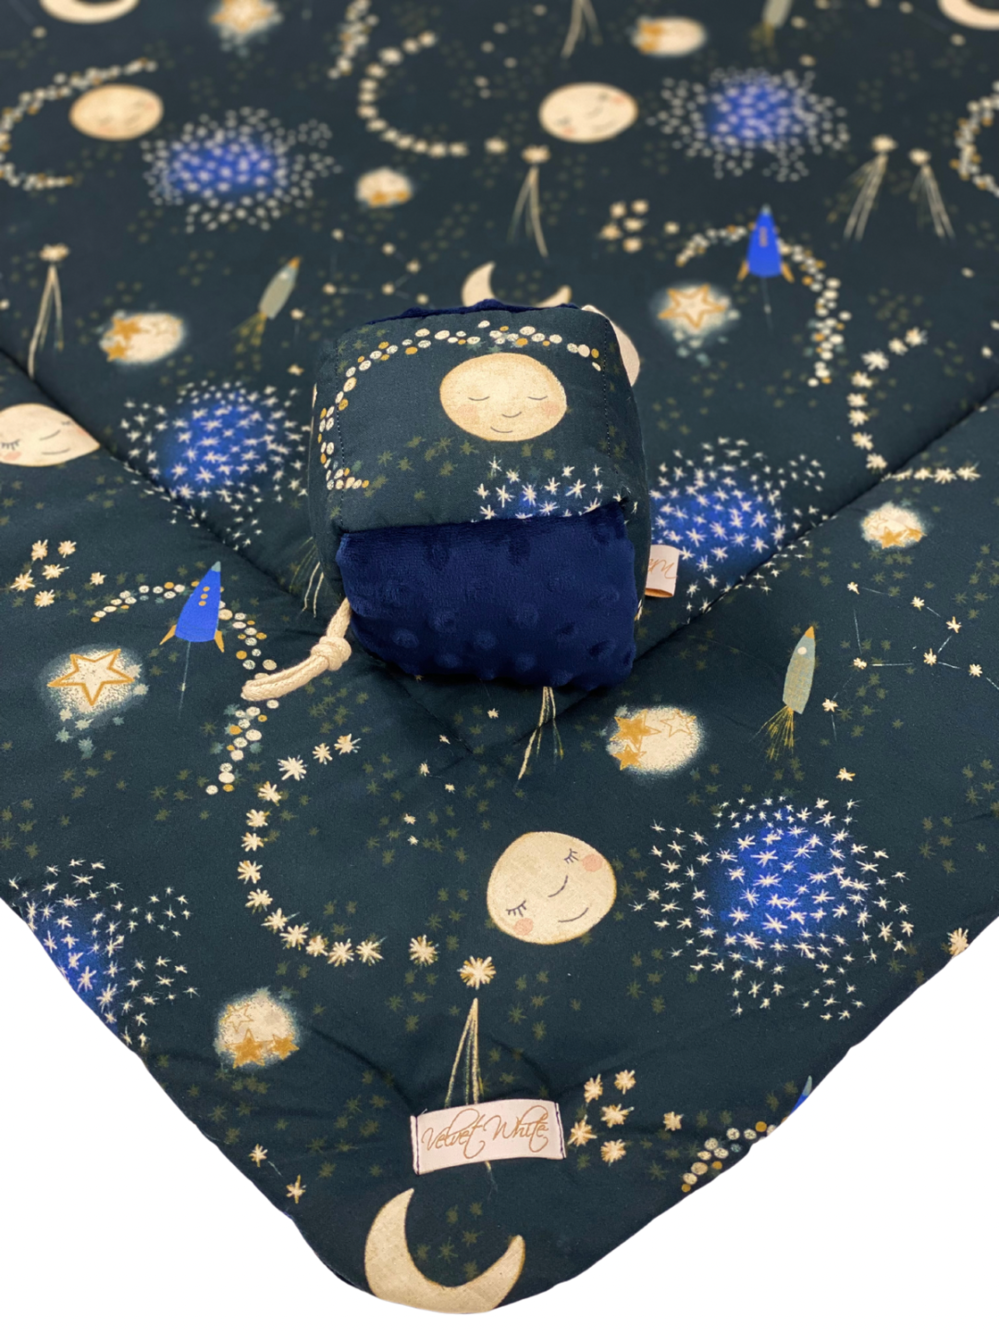 Night Sky Activity Mat  with a game of Cybos